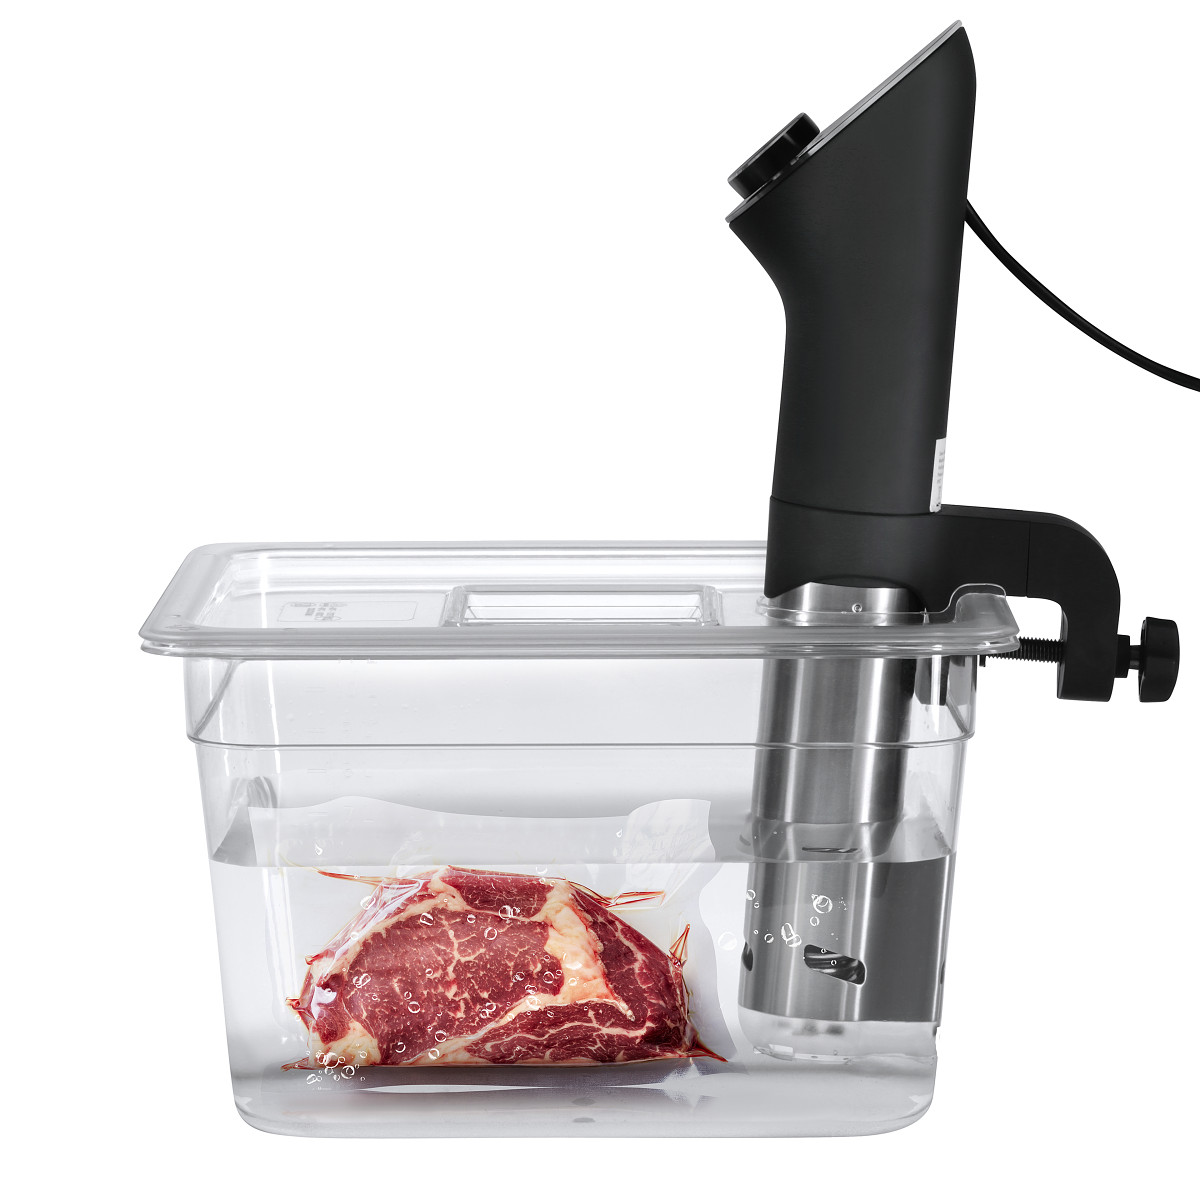 https://www.lauben.com/img/products/sous_vide_container_12/distribution/01.jpg